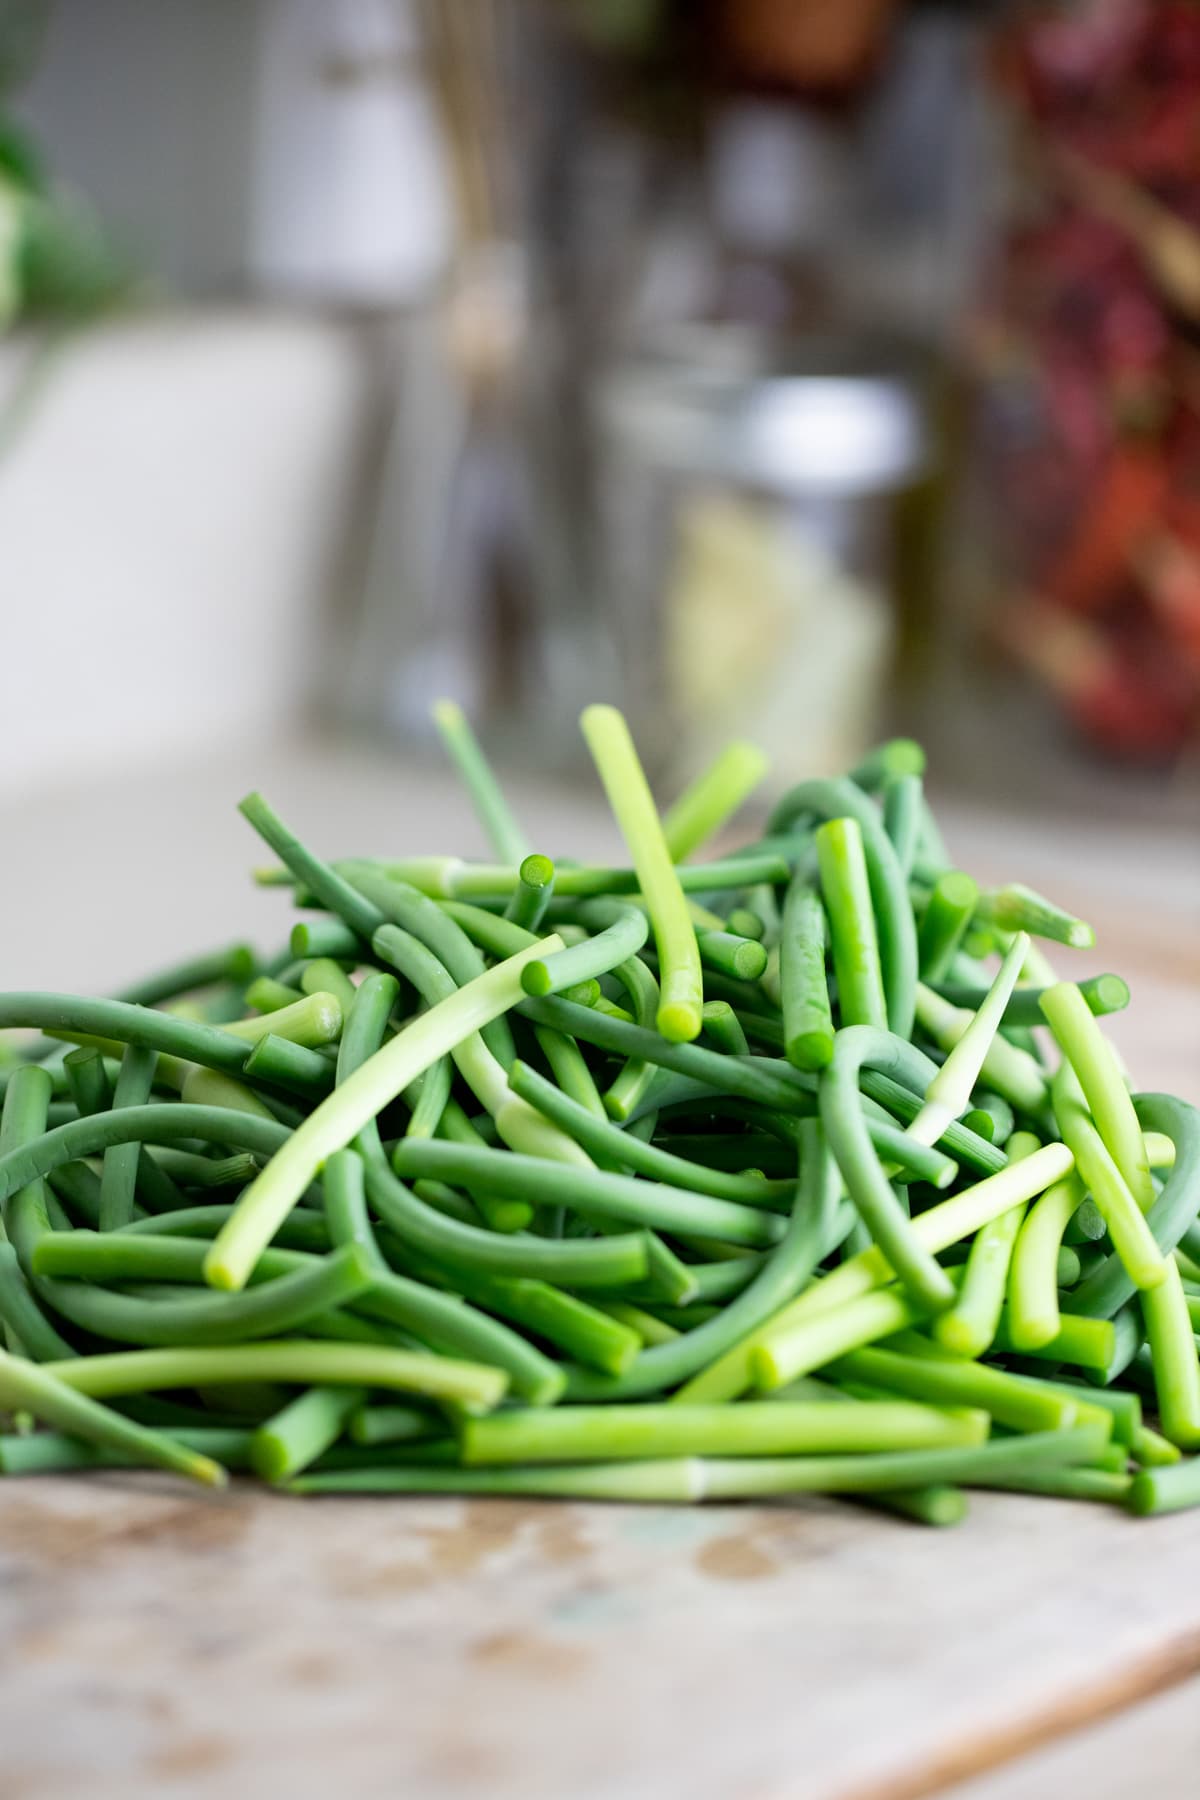 cutting the garlic scapes into smaller pieces